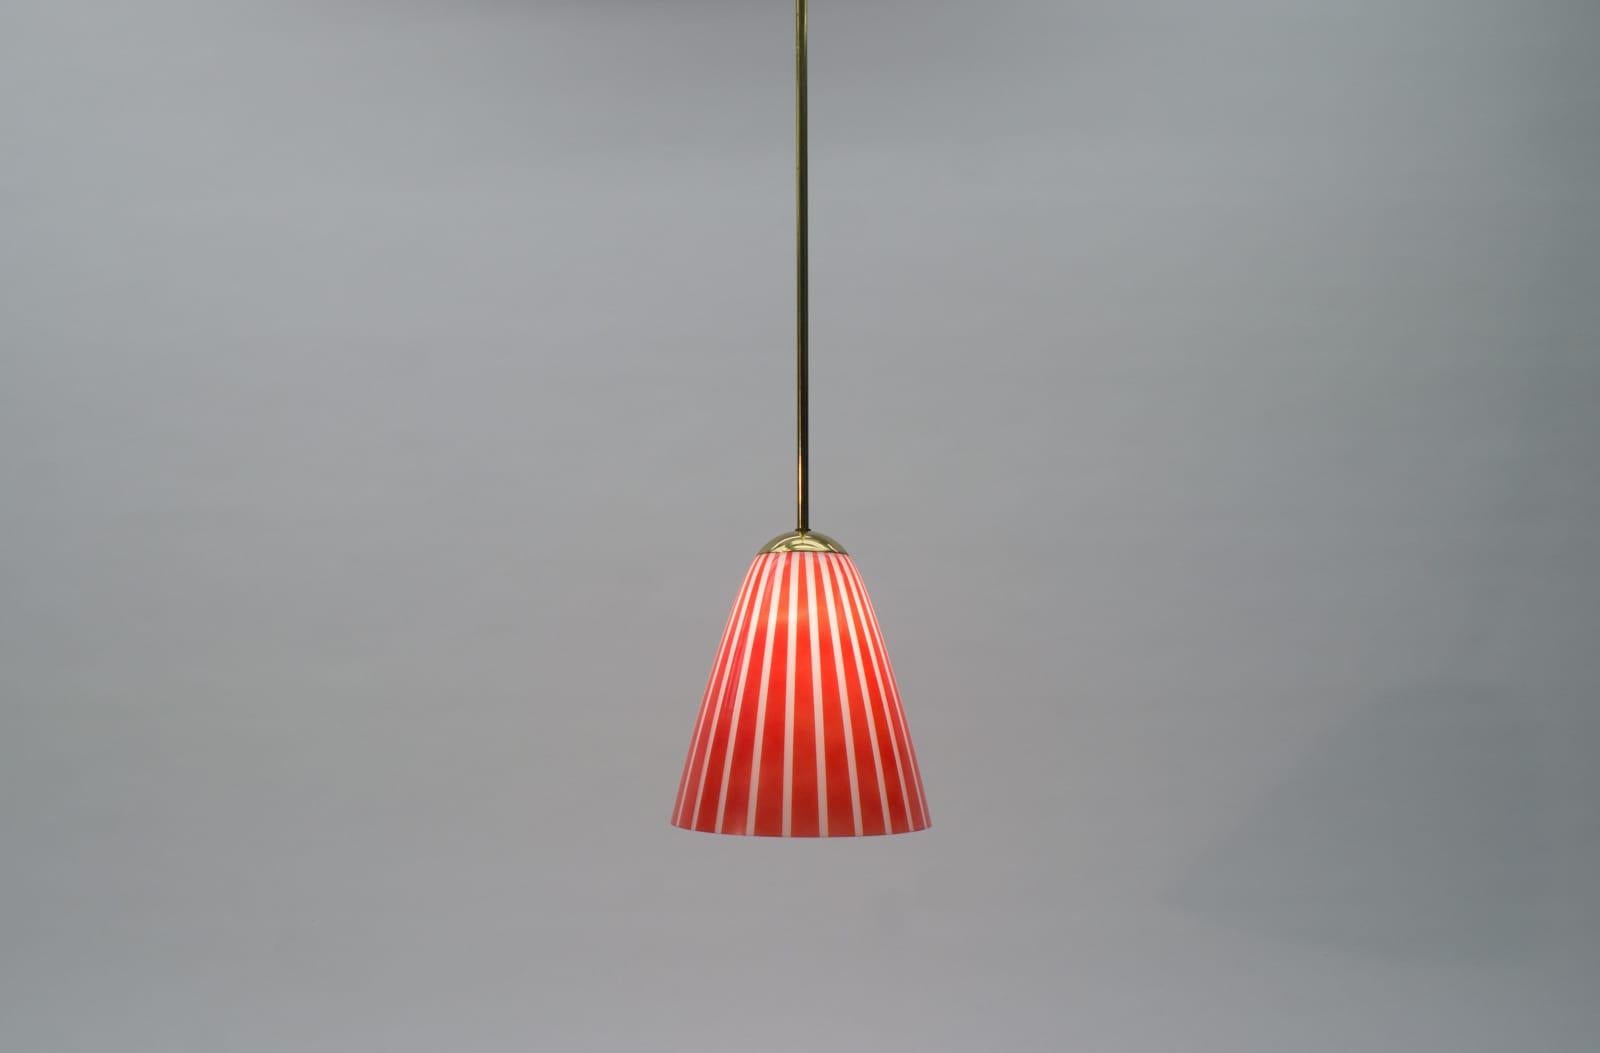 Elegant Mid-Century Modern Pendant Lamp Made of Brass and Glass, 1950s Austria In Good Condition For Sale In Nürnberg, Bayern